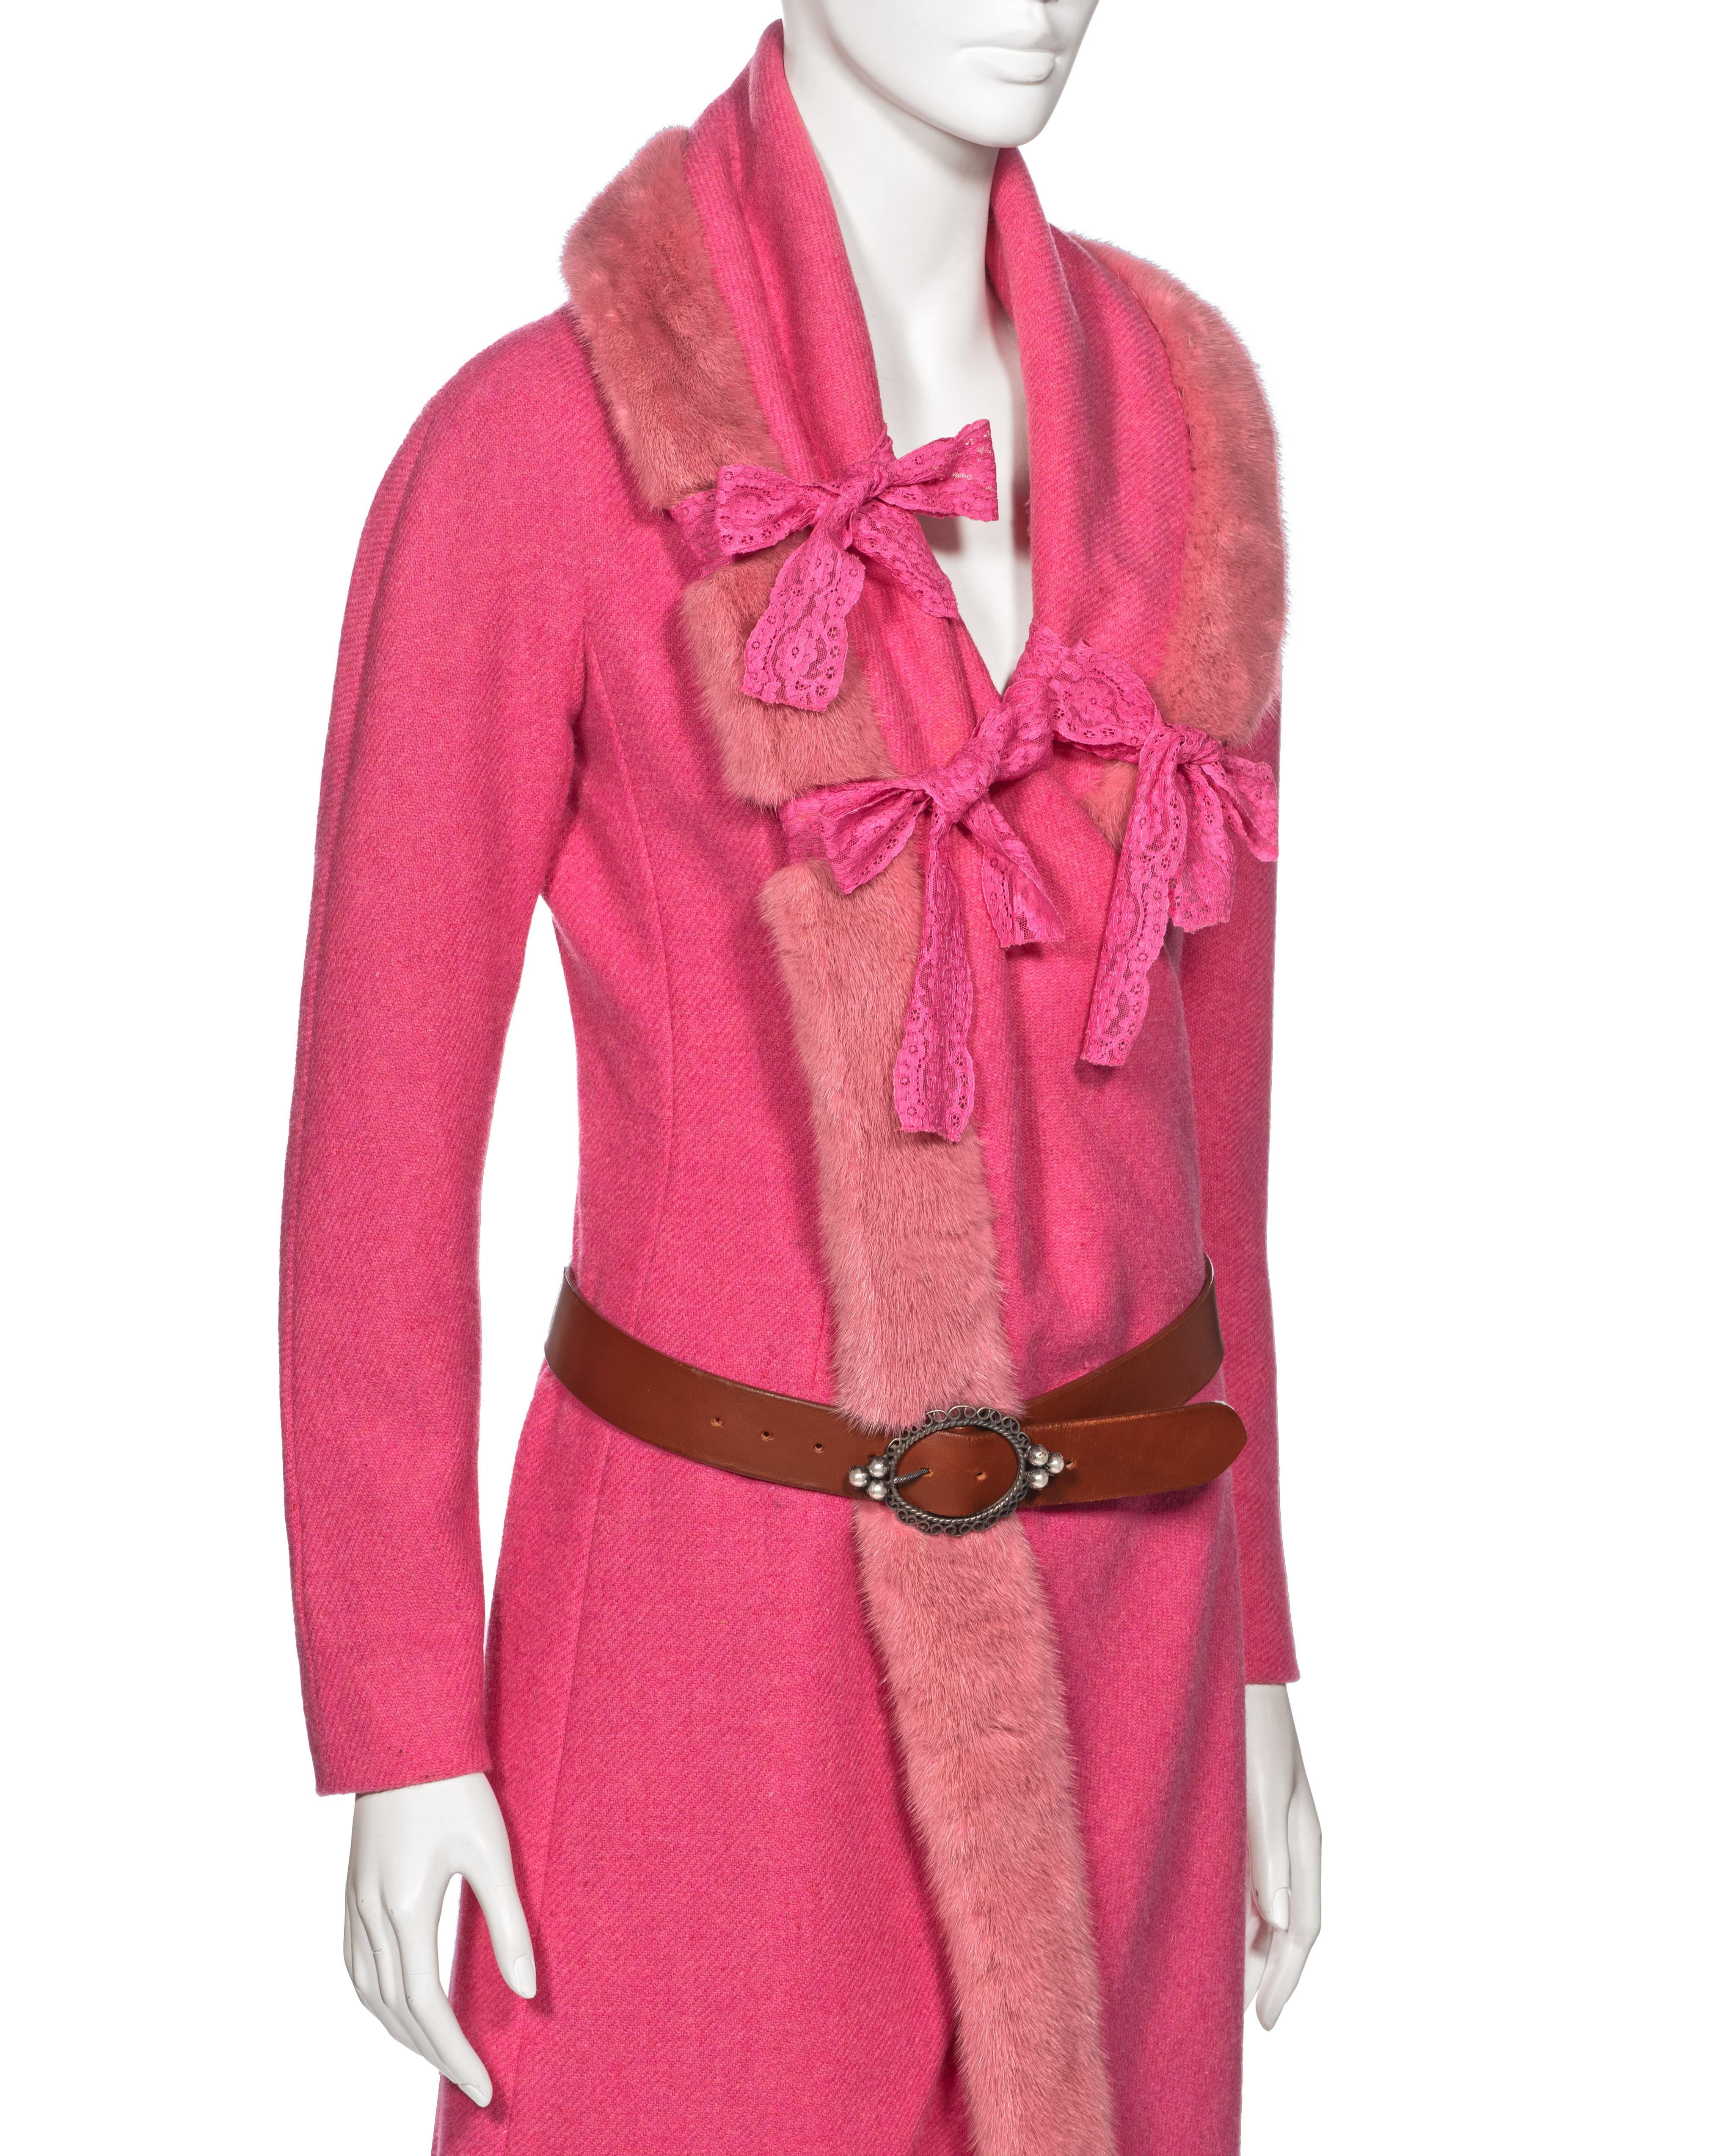 Christian Dior by John Galliano Pink Tweed Coat With Mink Fur Collar, fw 1998 For Sale 3